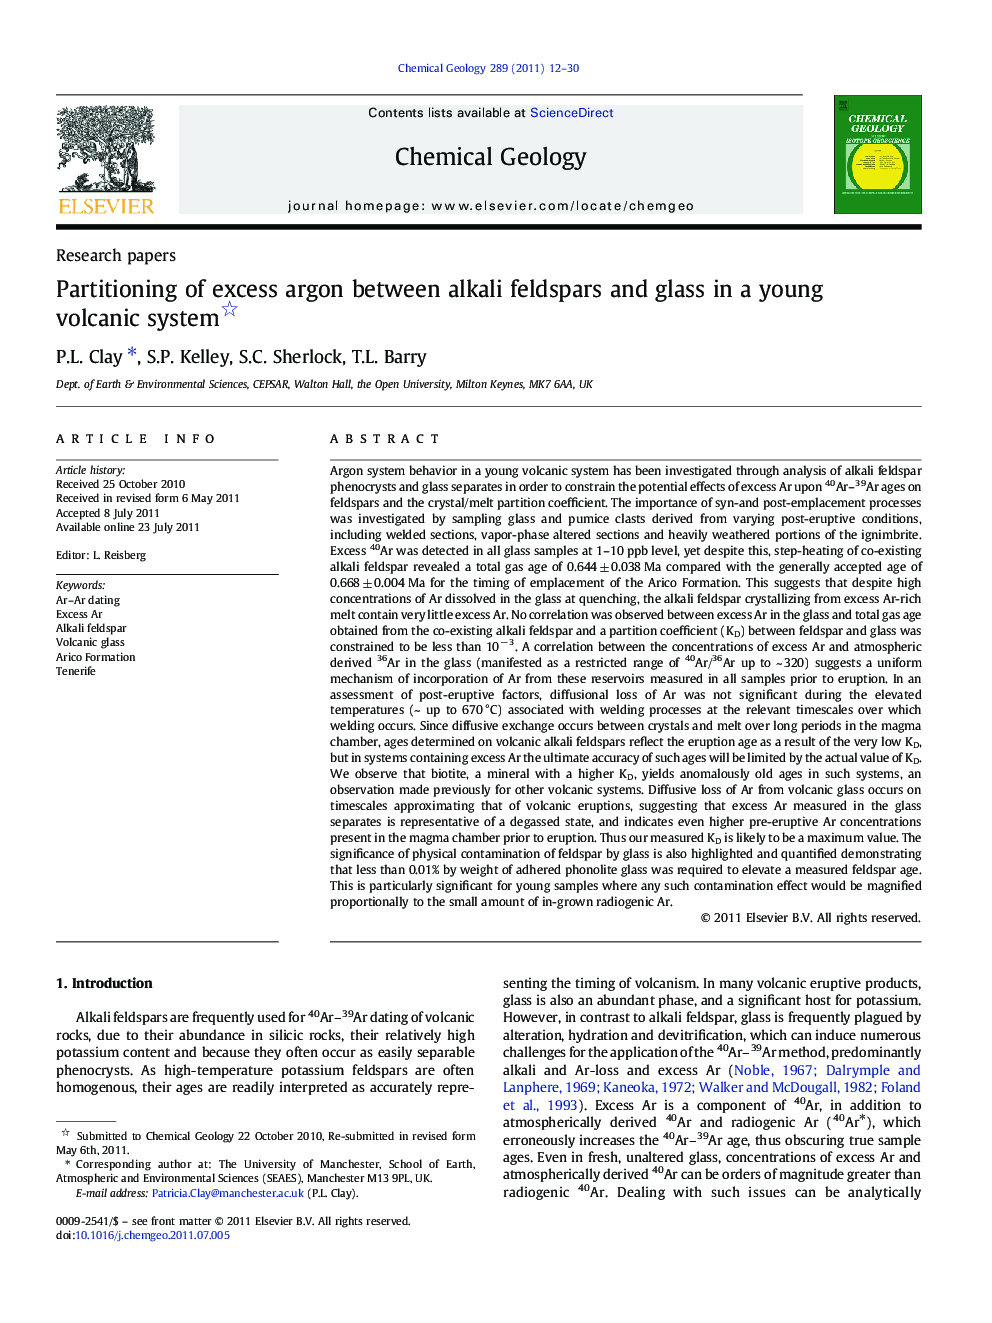 Partitioning of excess argon between alkali feldspars and glass in a young volcanic system